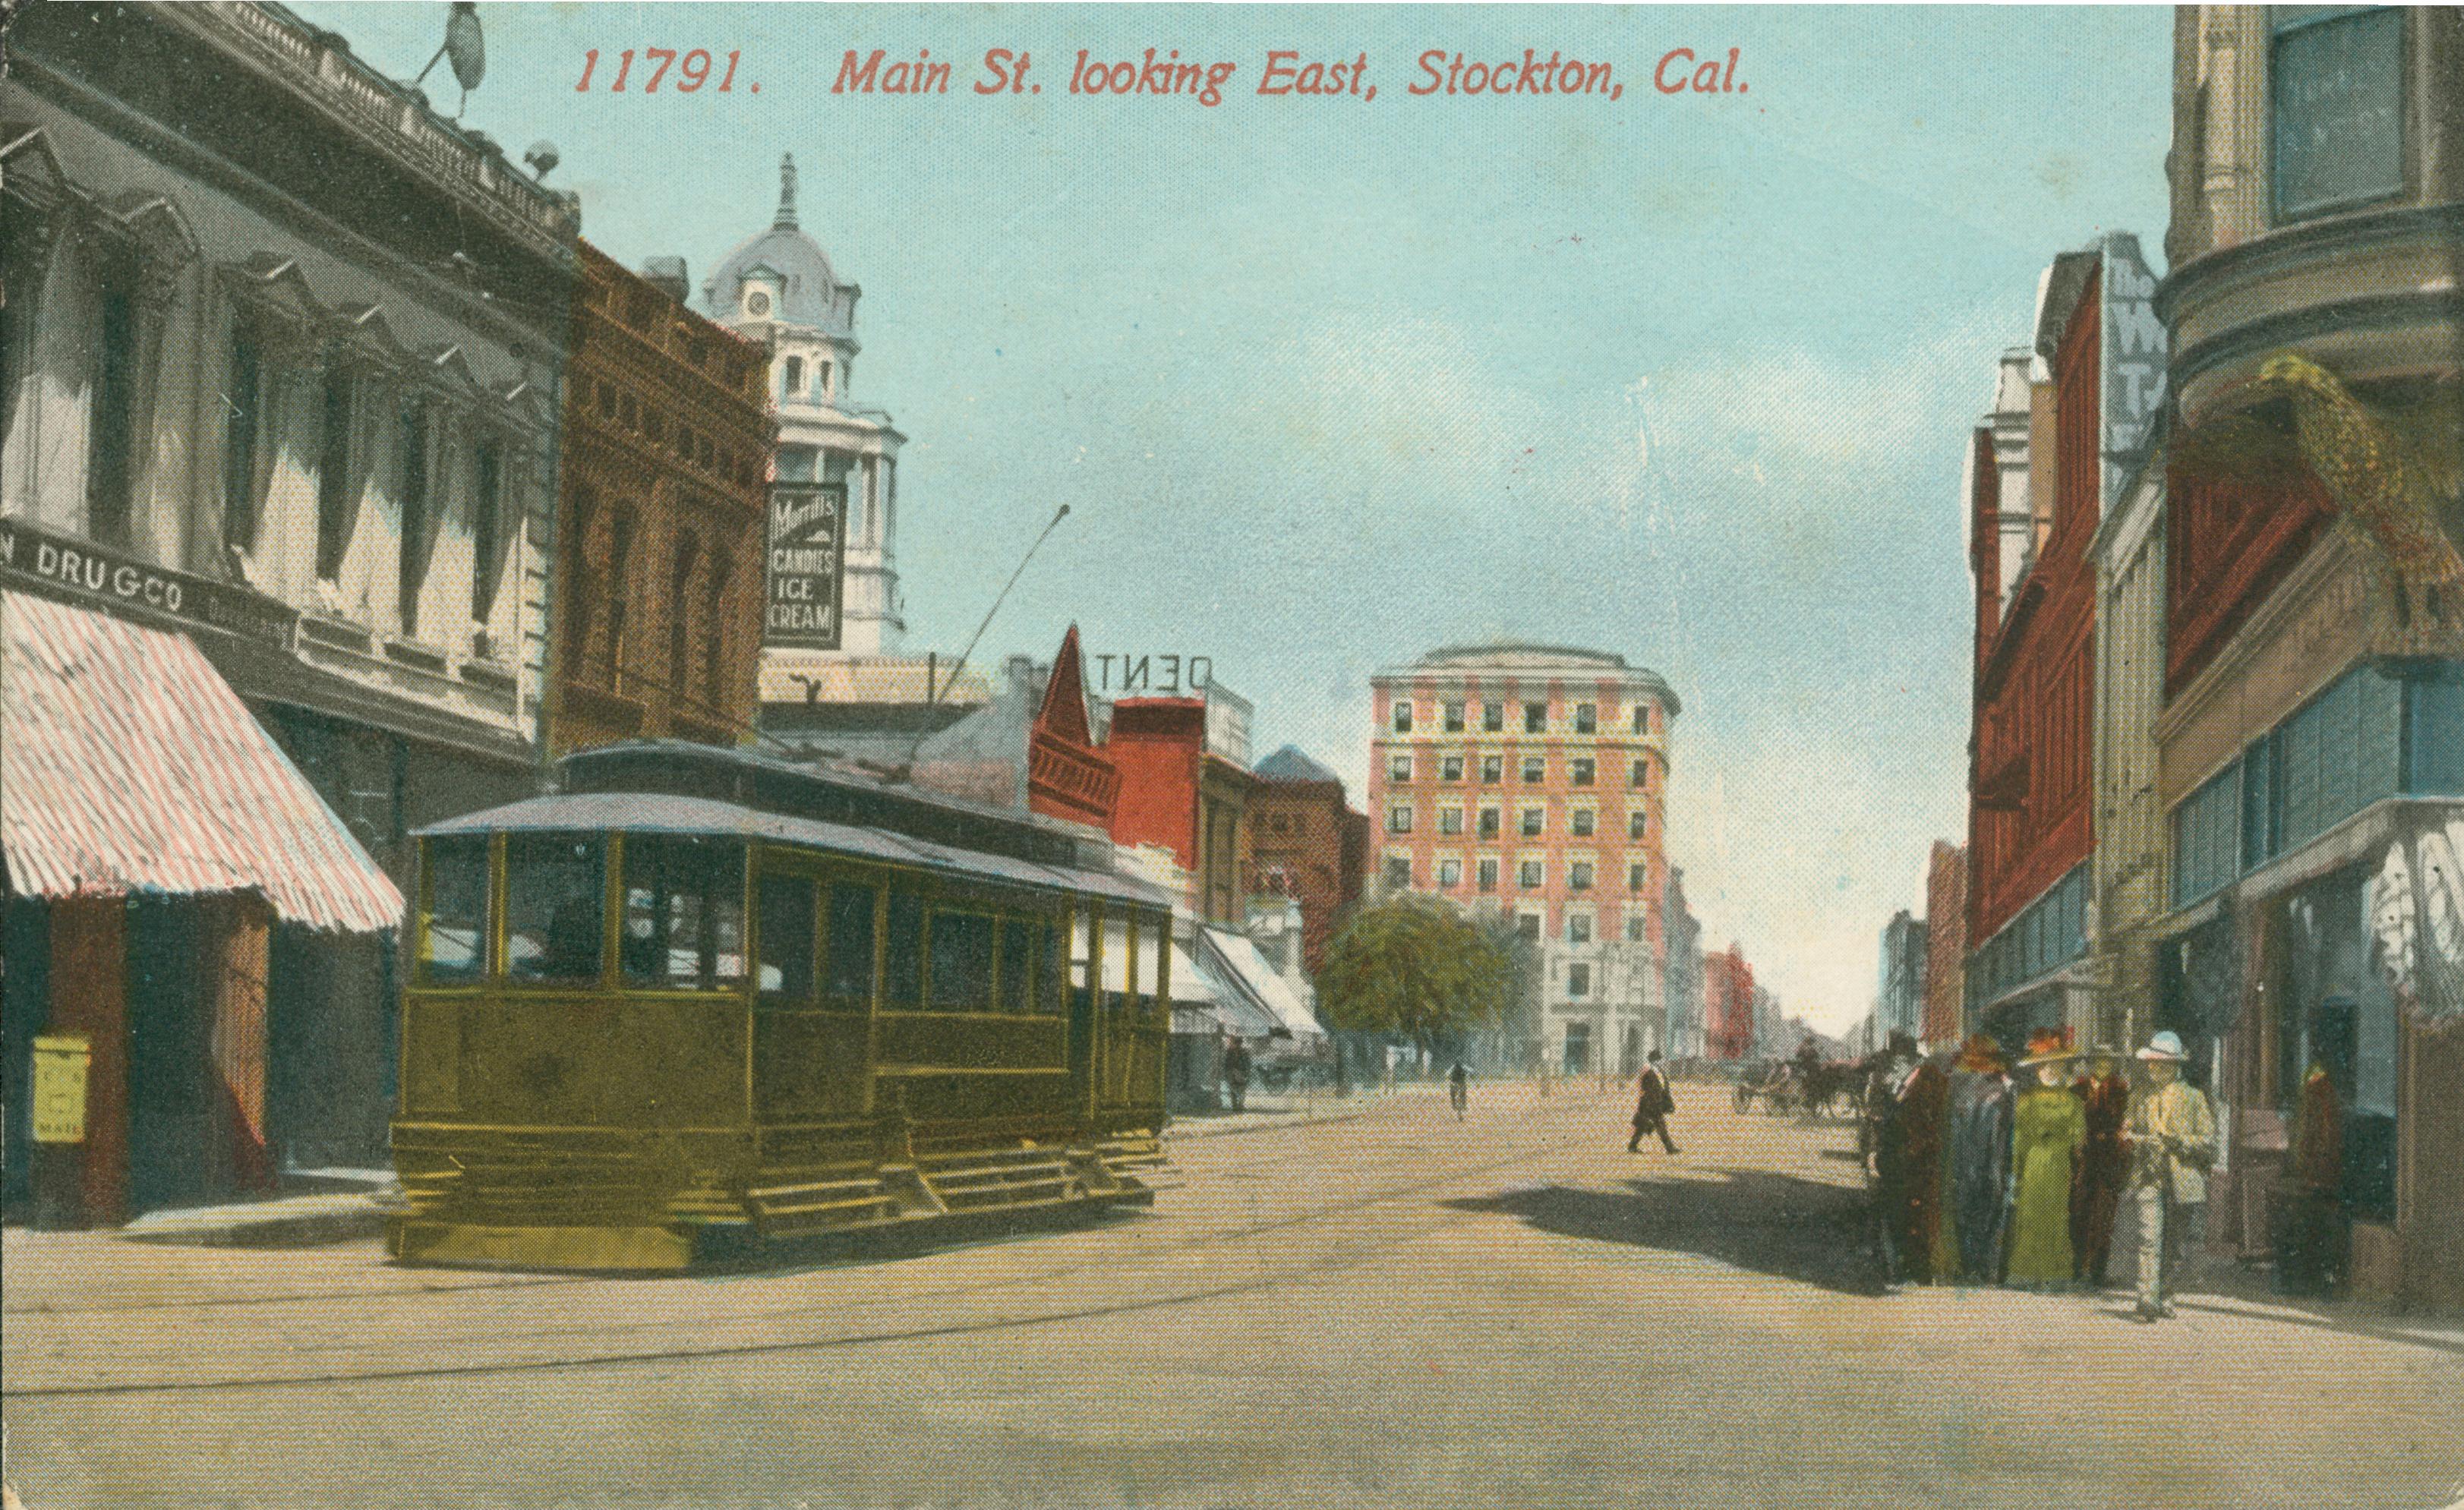 View of Main Street, buildings on either side of the street with a trolley and tracks down the center of the street, people waiting on the corner